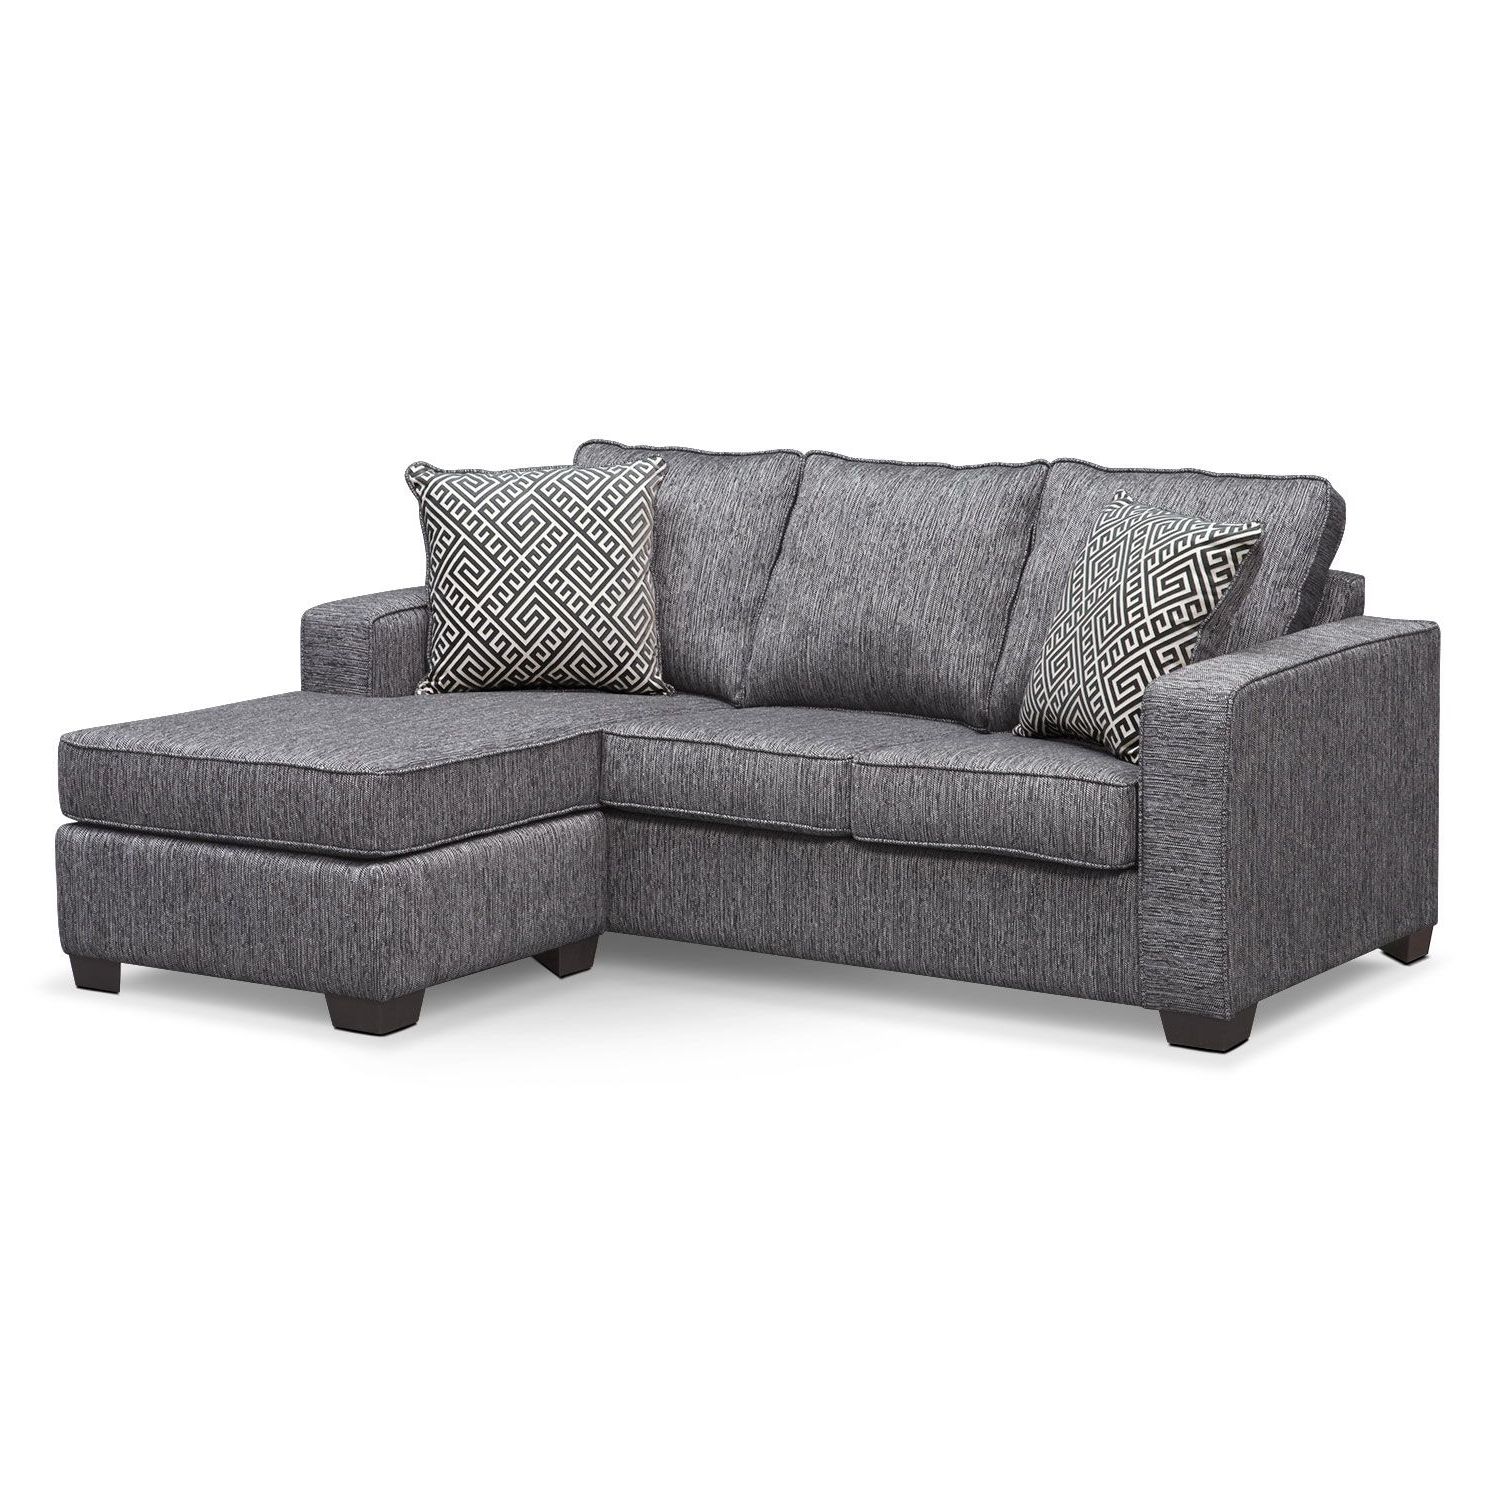 $799.99 Living Room Furniture – Sterling Charcoal Queen Memory With Regard To Famous Sleeper Chaise Sofas (Photo 6 of 15)